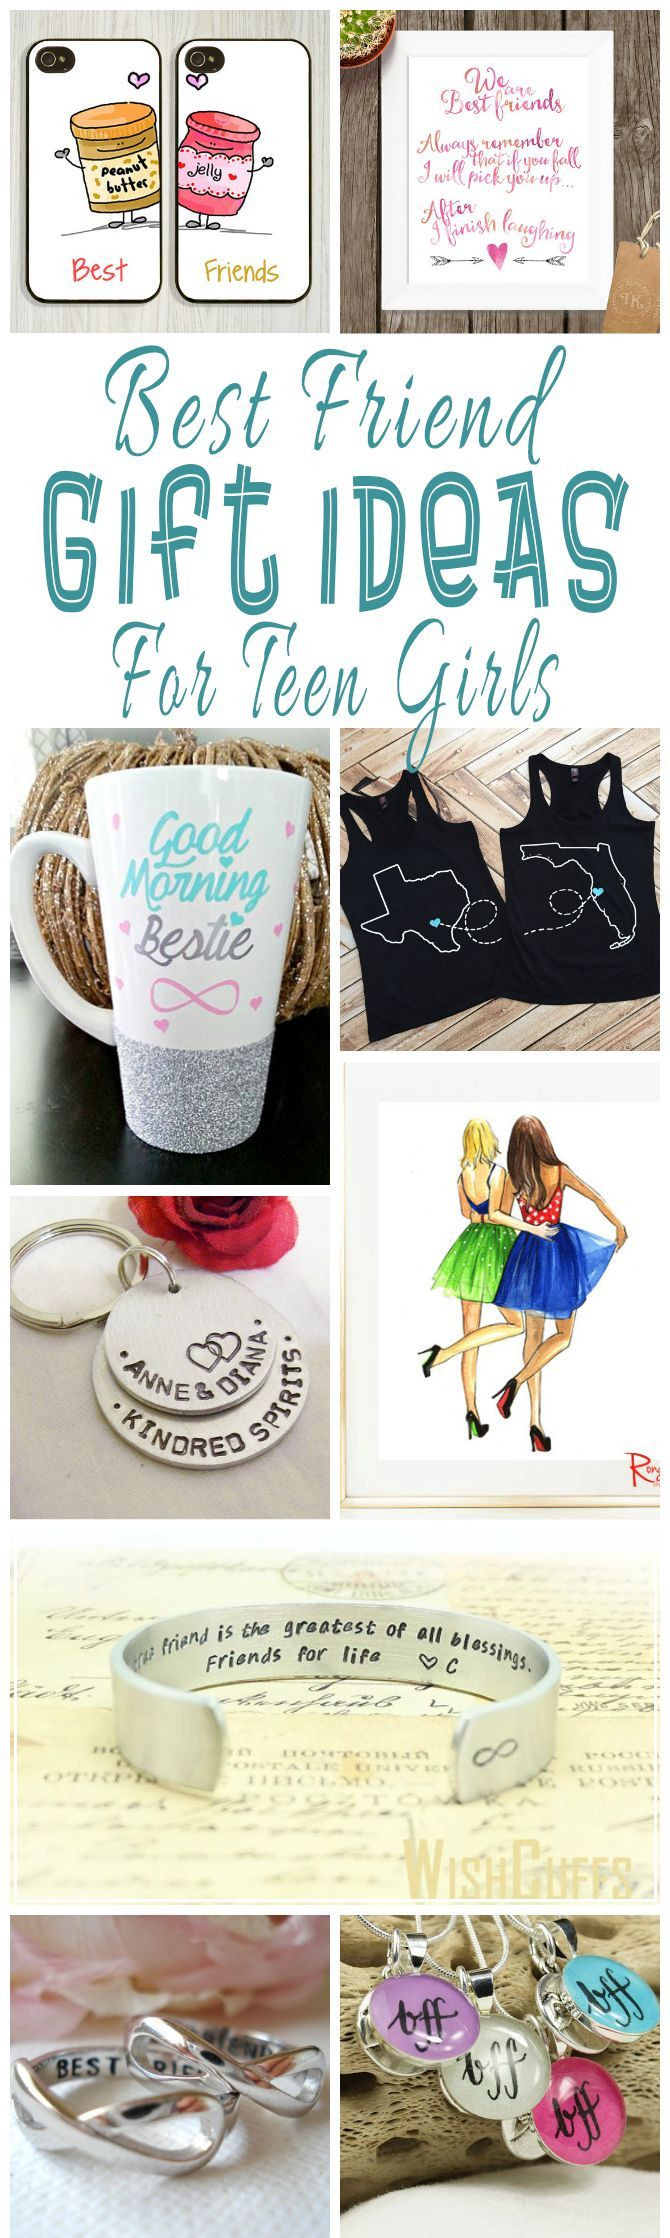 Unique Gift Ideas For Best Friends
 Best Friend Gift Ideas For Teens